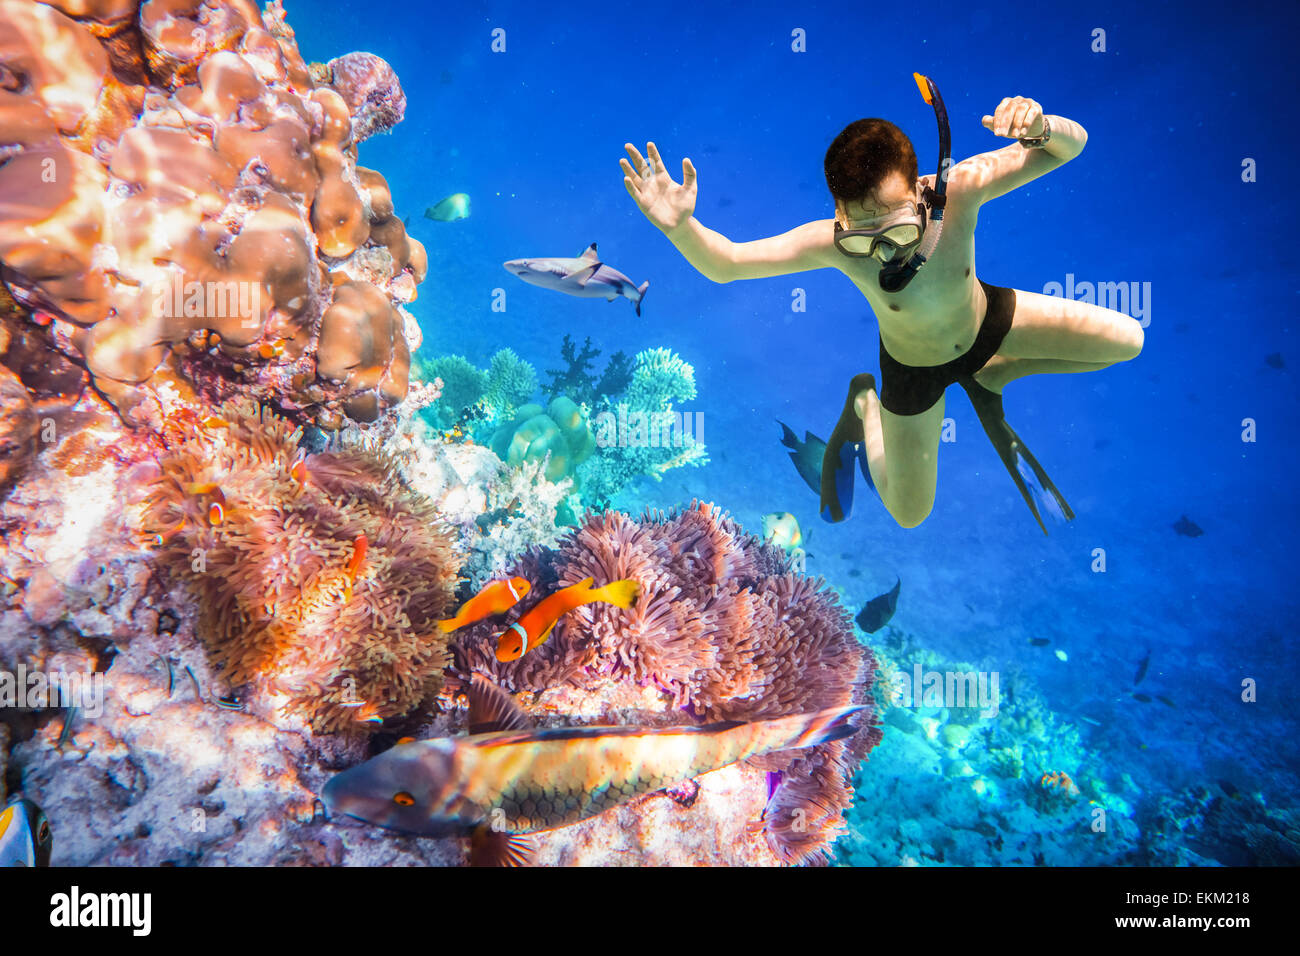 Snorkeler diving along the brain coral. Maldives - Ocean coral reef. Warning - authentic shooting underwater in challenging cond Stock Photo